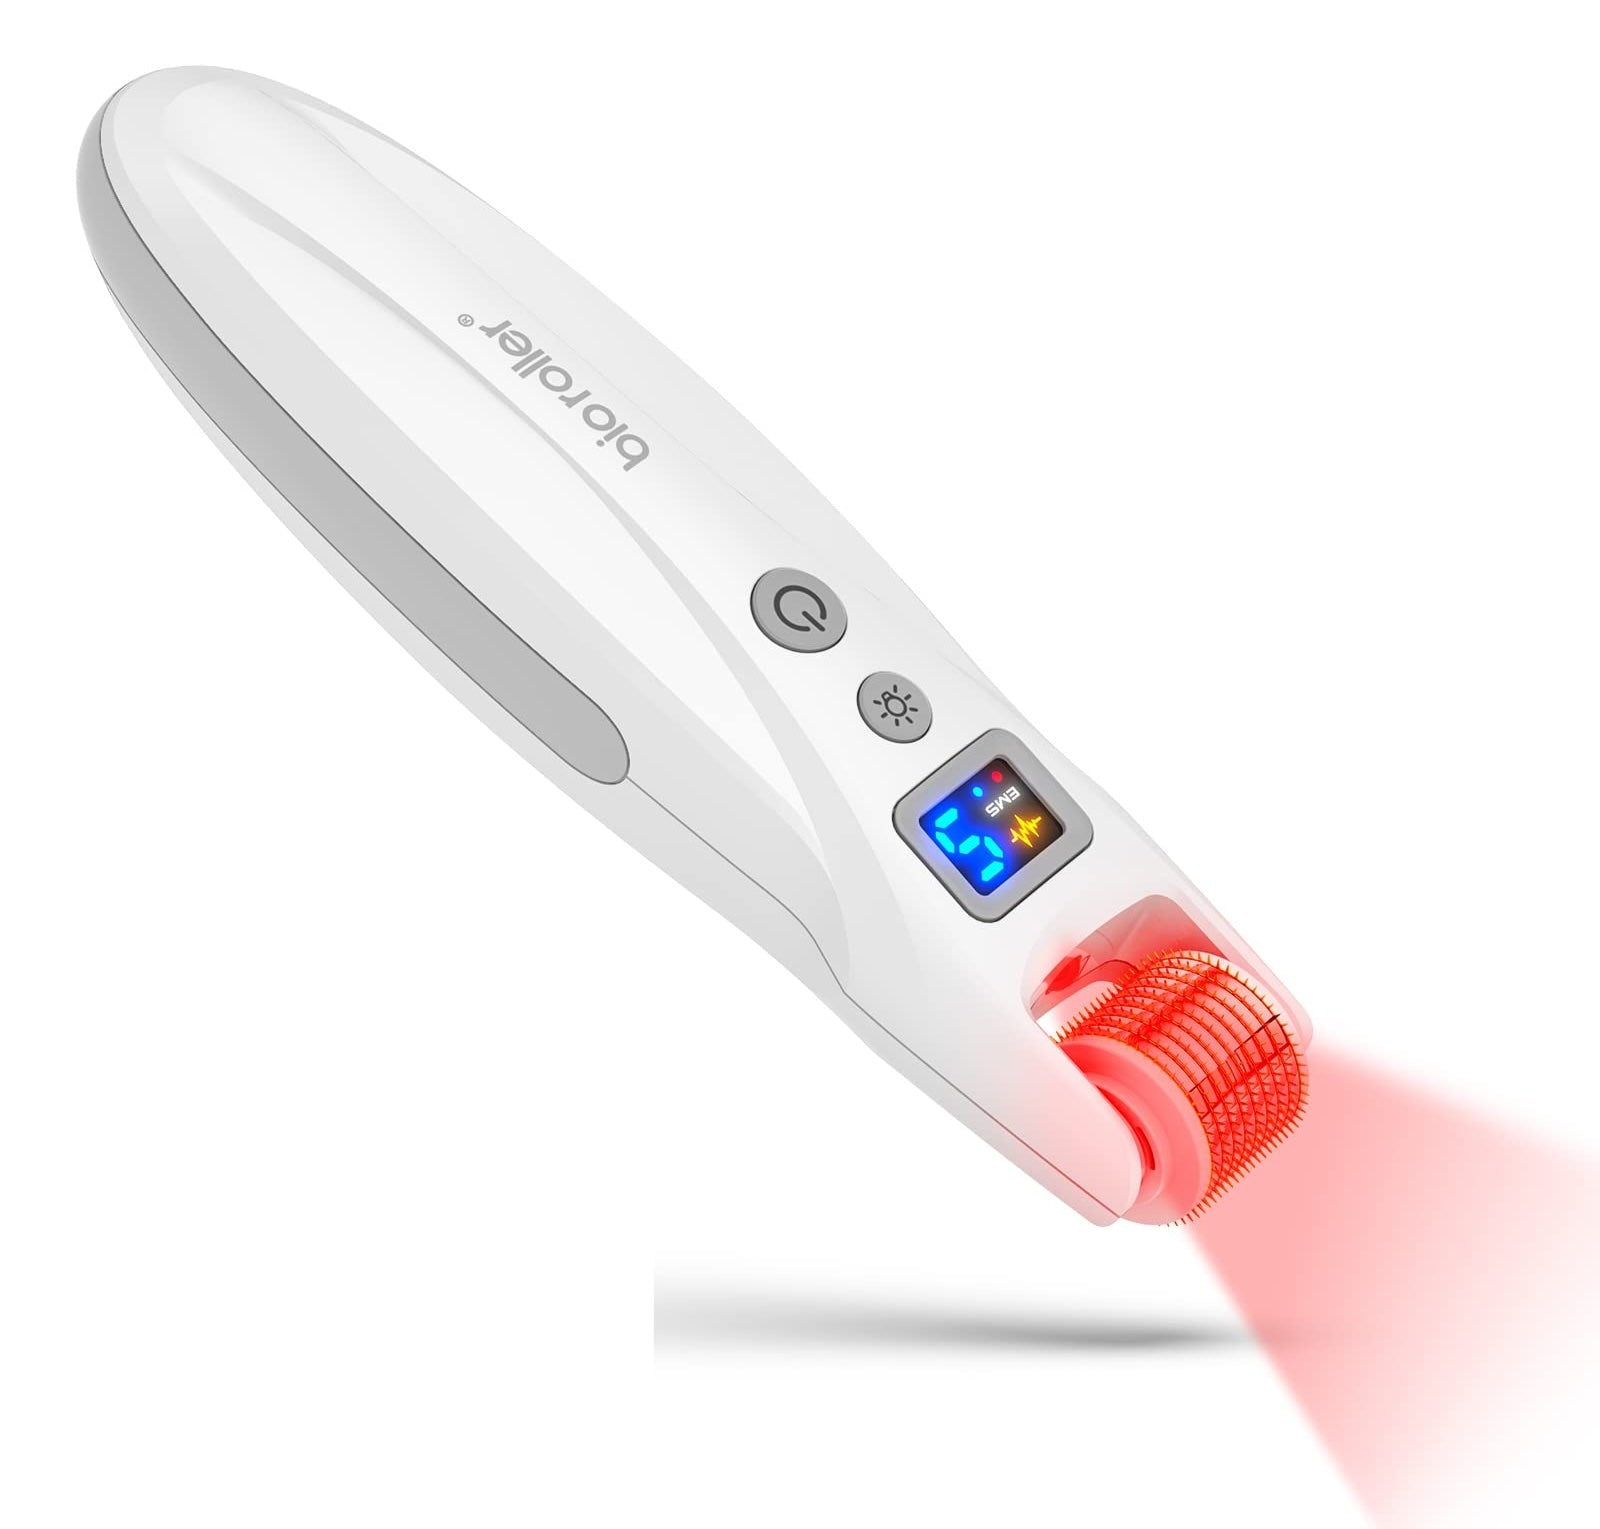 Hair Growth Derma Roller EMS Microneedling for Hair and Skin